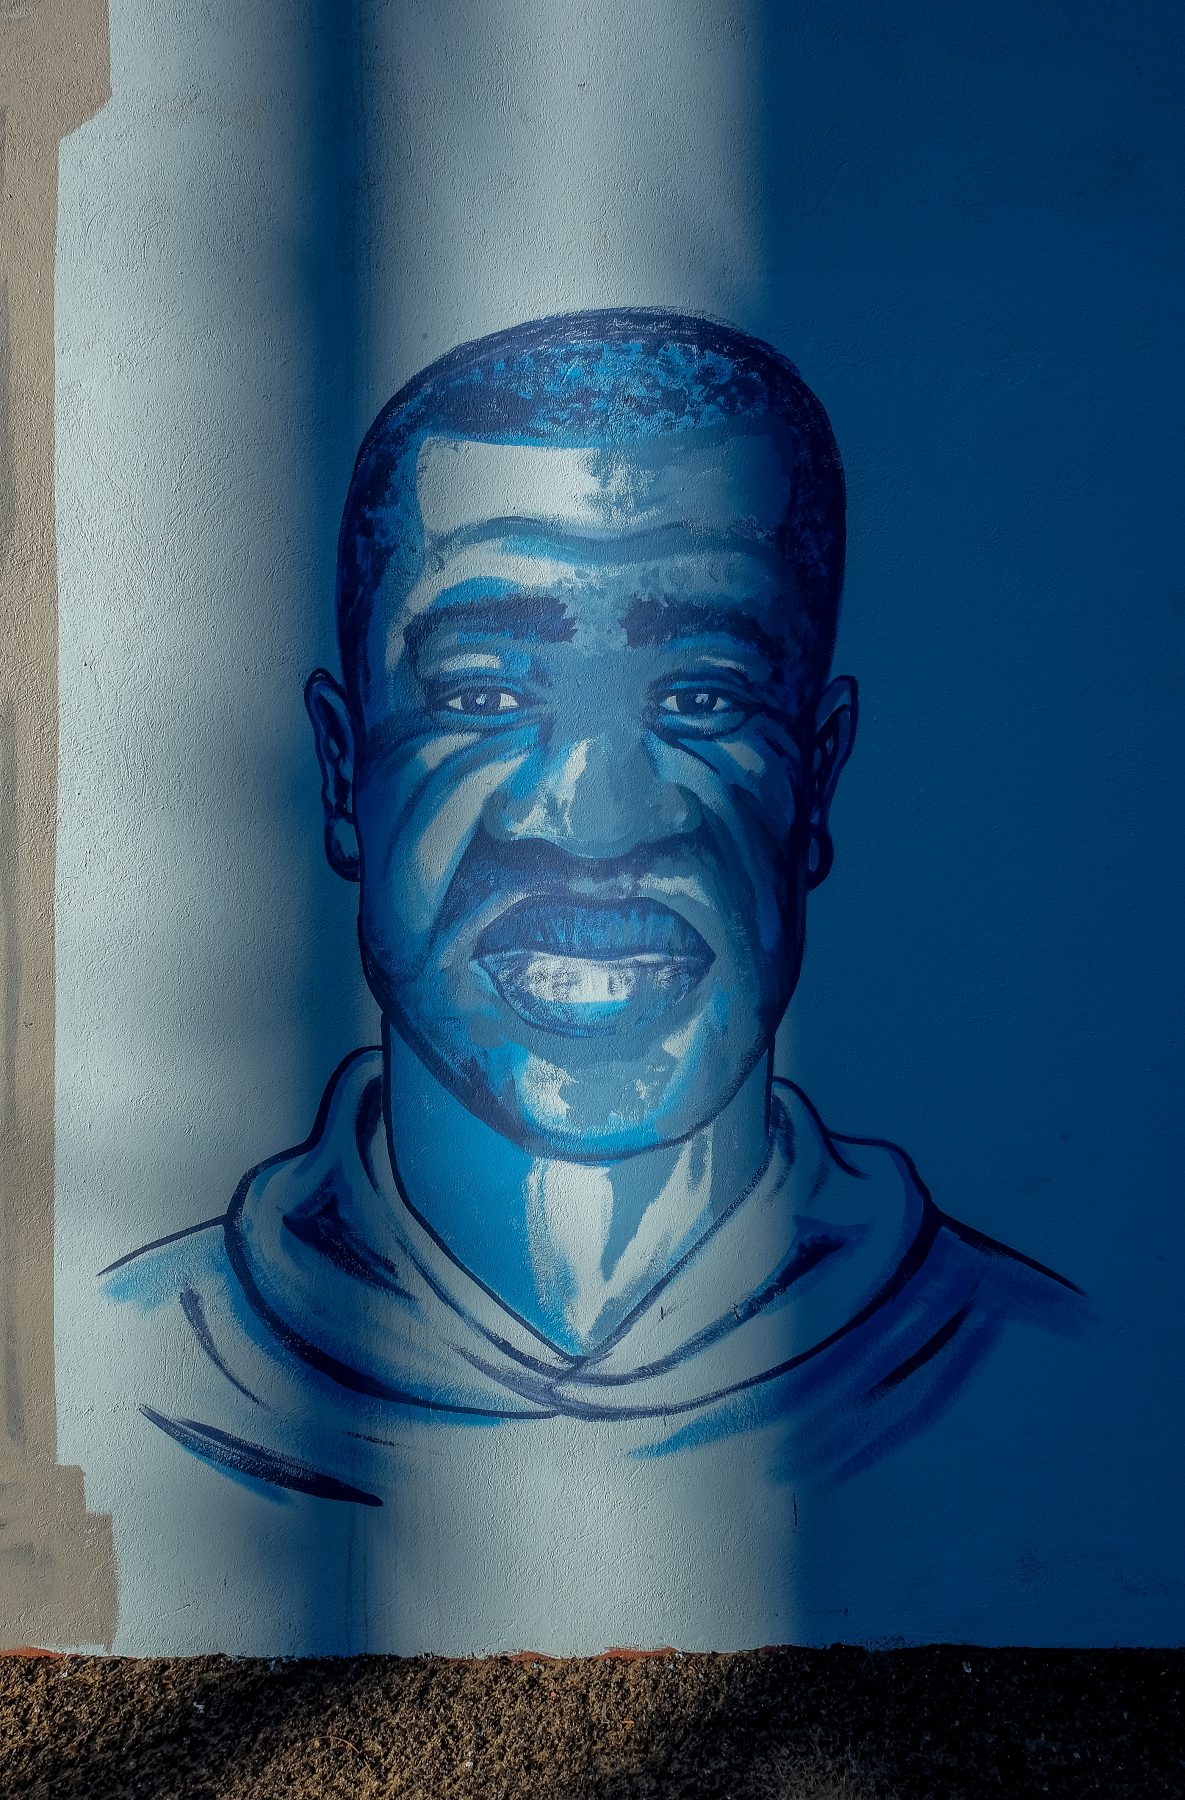 Sunlight illuminates a beautifully painted mural of George Floyd. The paint colors... all shades of blue.